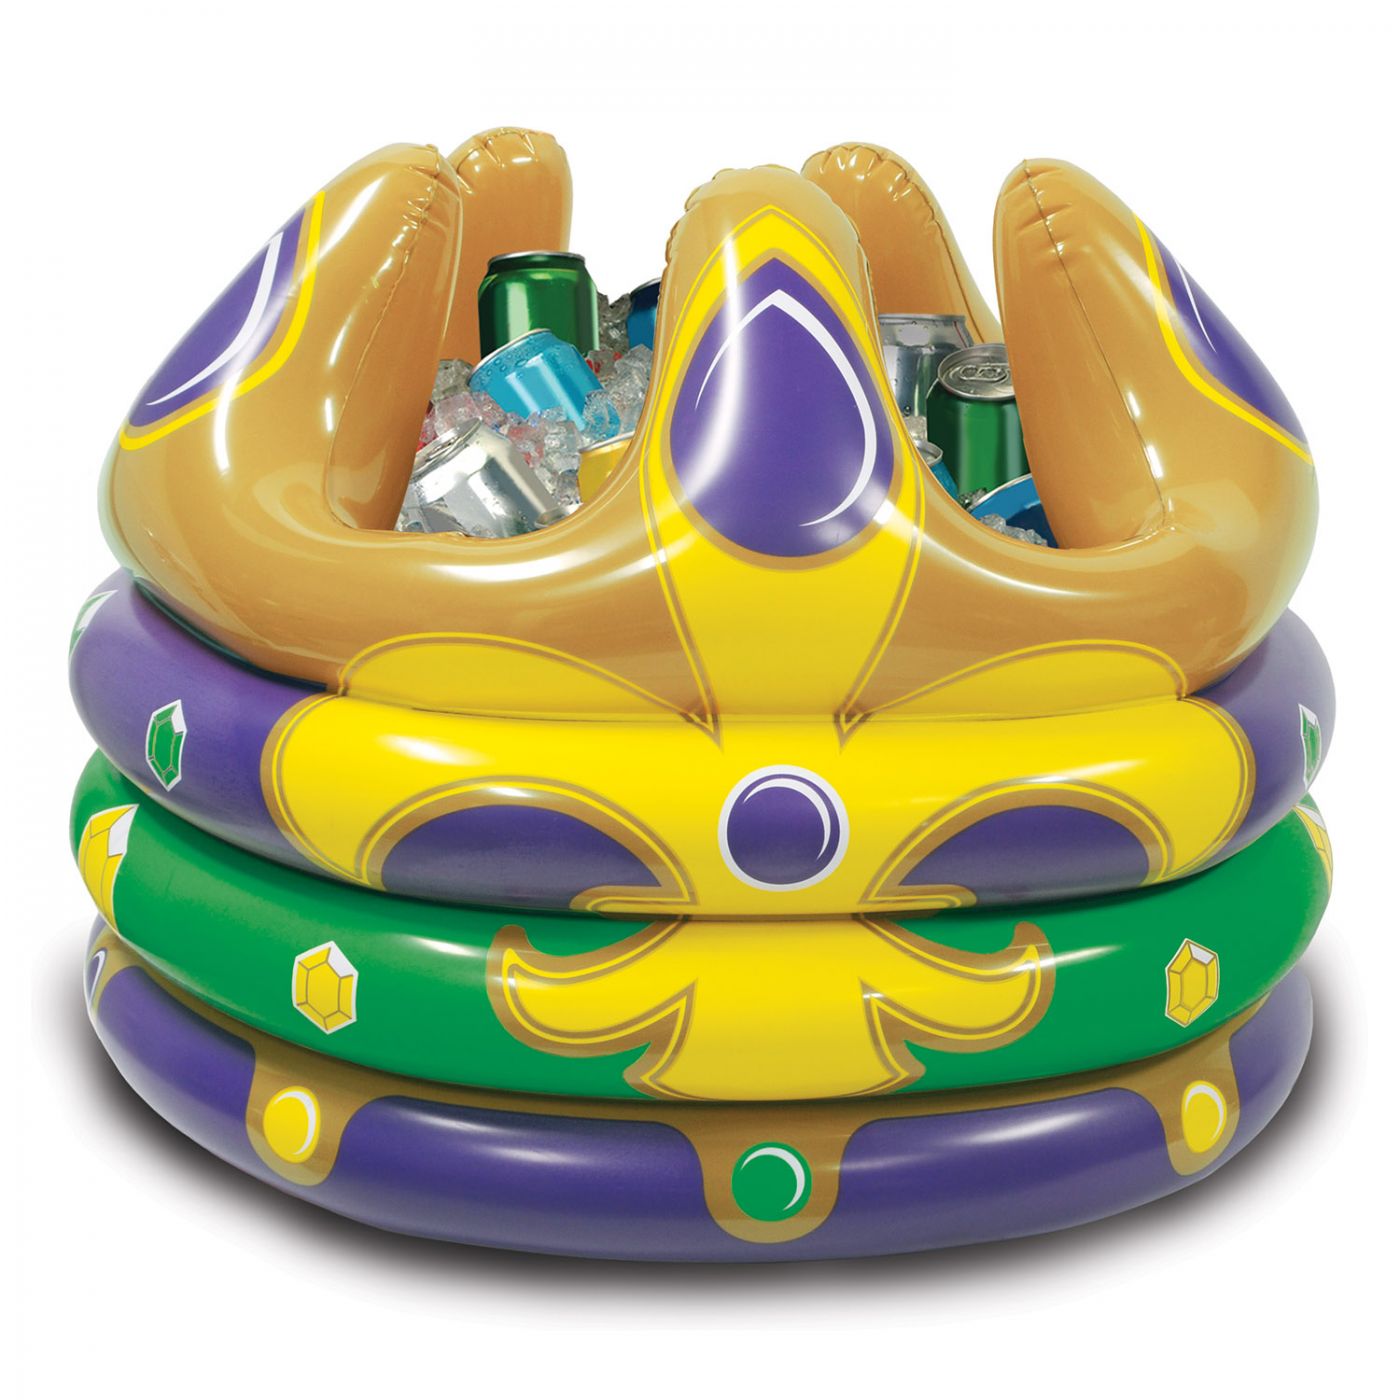 Inflatable Crown Cooler (6) image